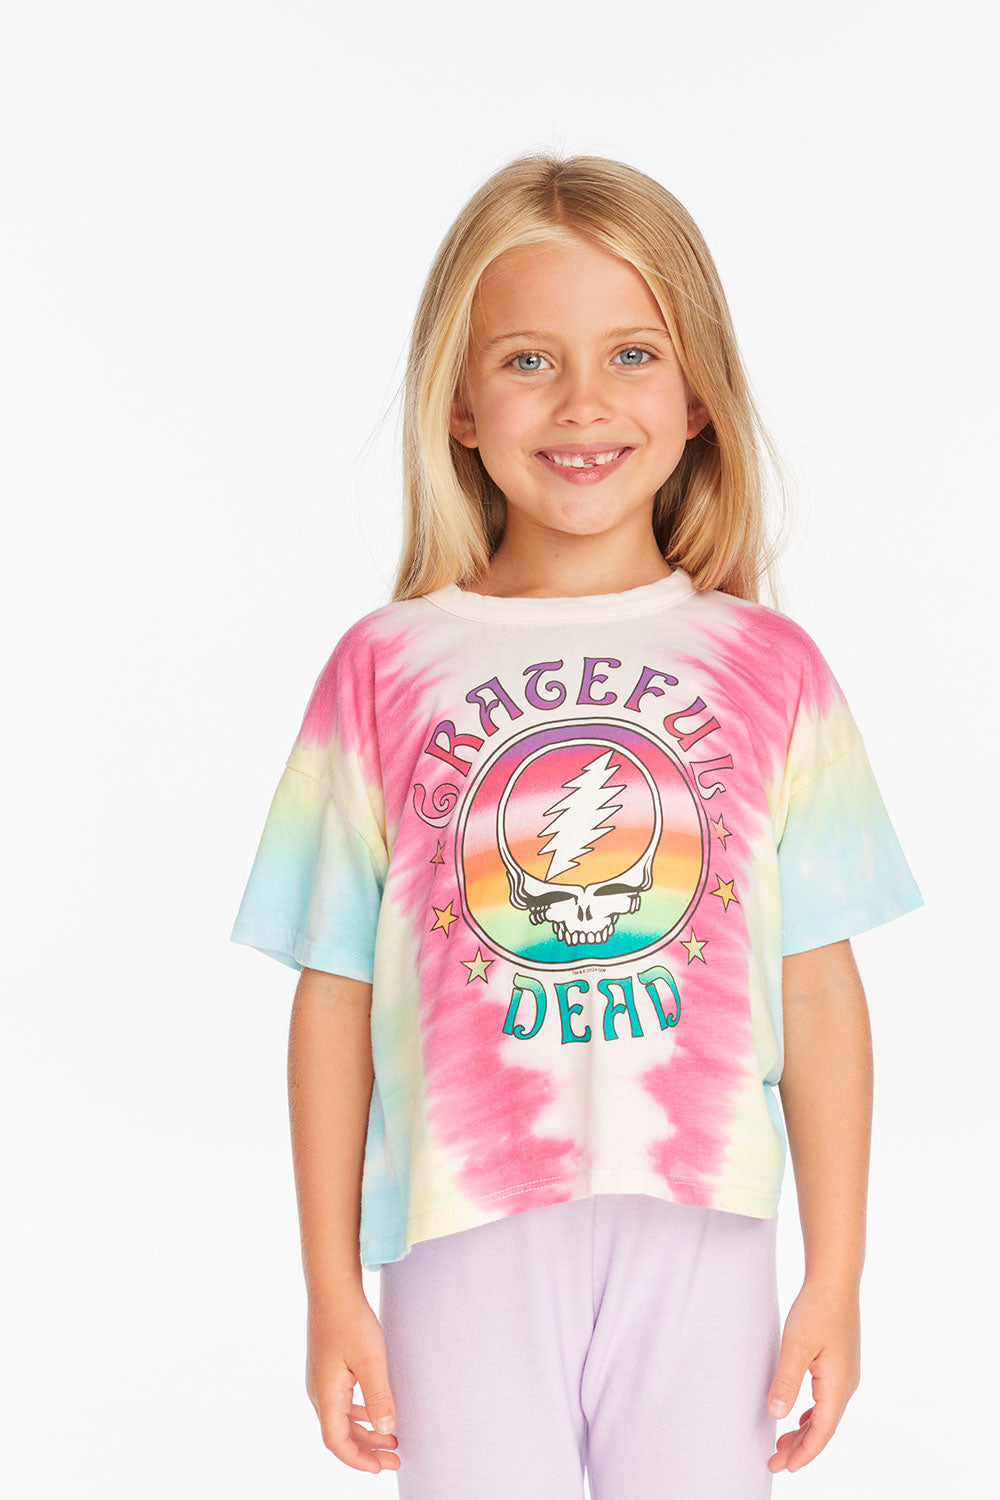 Grateful Dead Tie Dye Steal Your Face Tee Girls chaserbrand